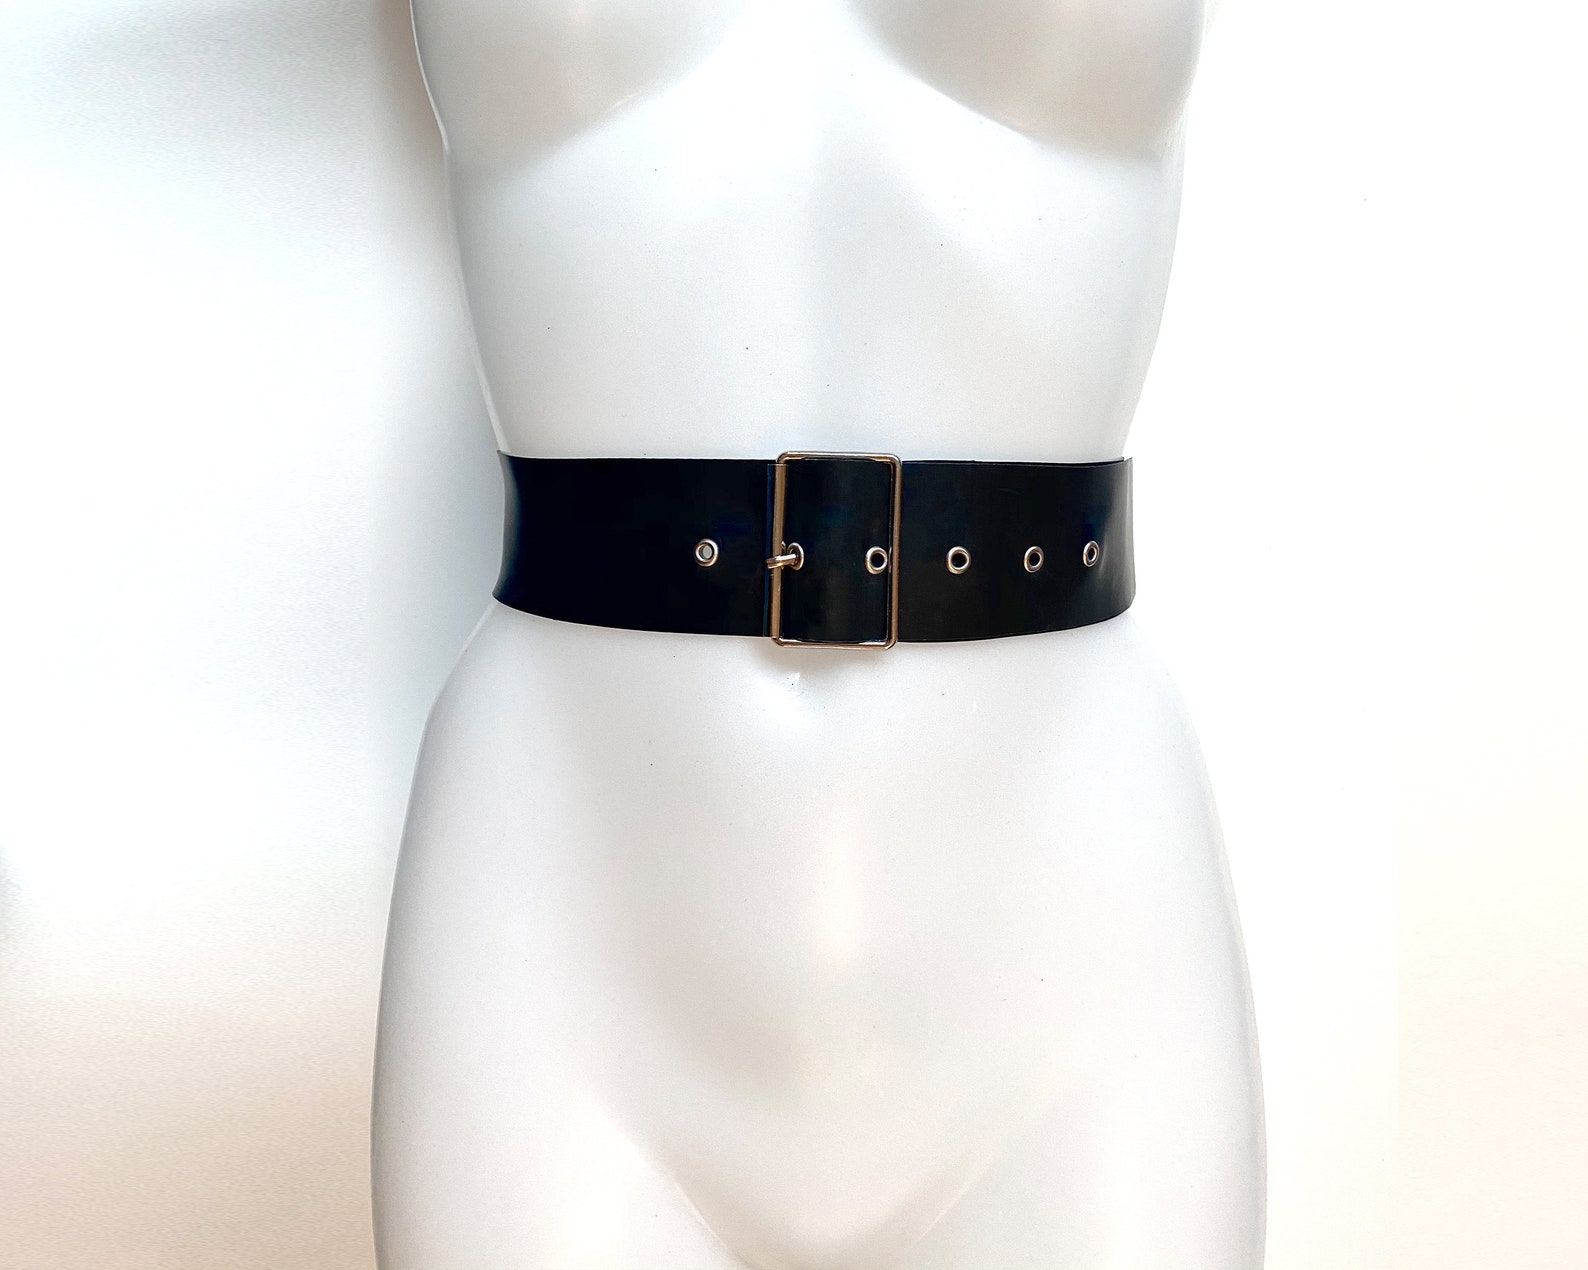 Basic Latex Rubber Waist Corset Belt With Silver or Gold - Etsy UK